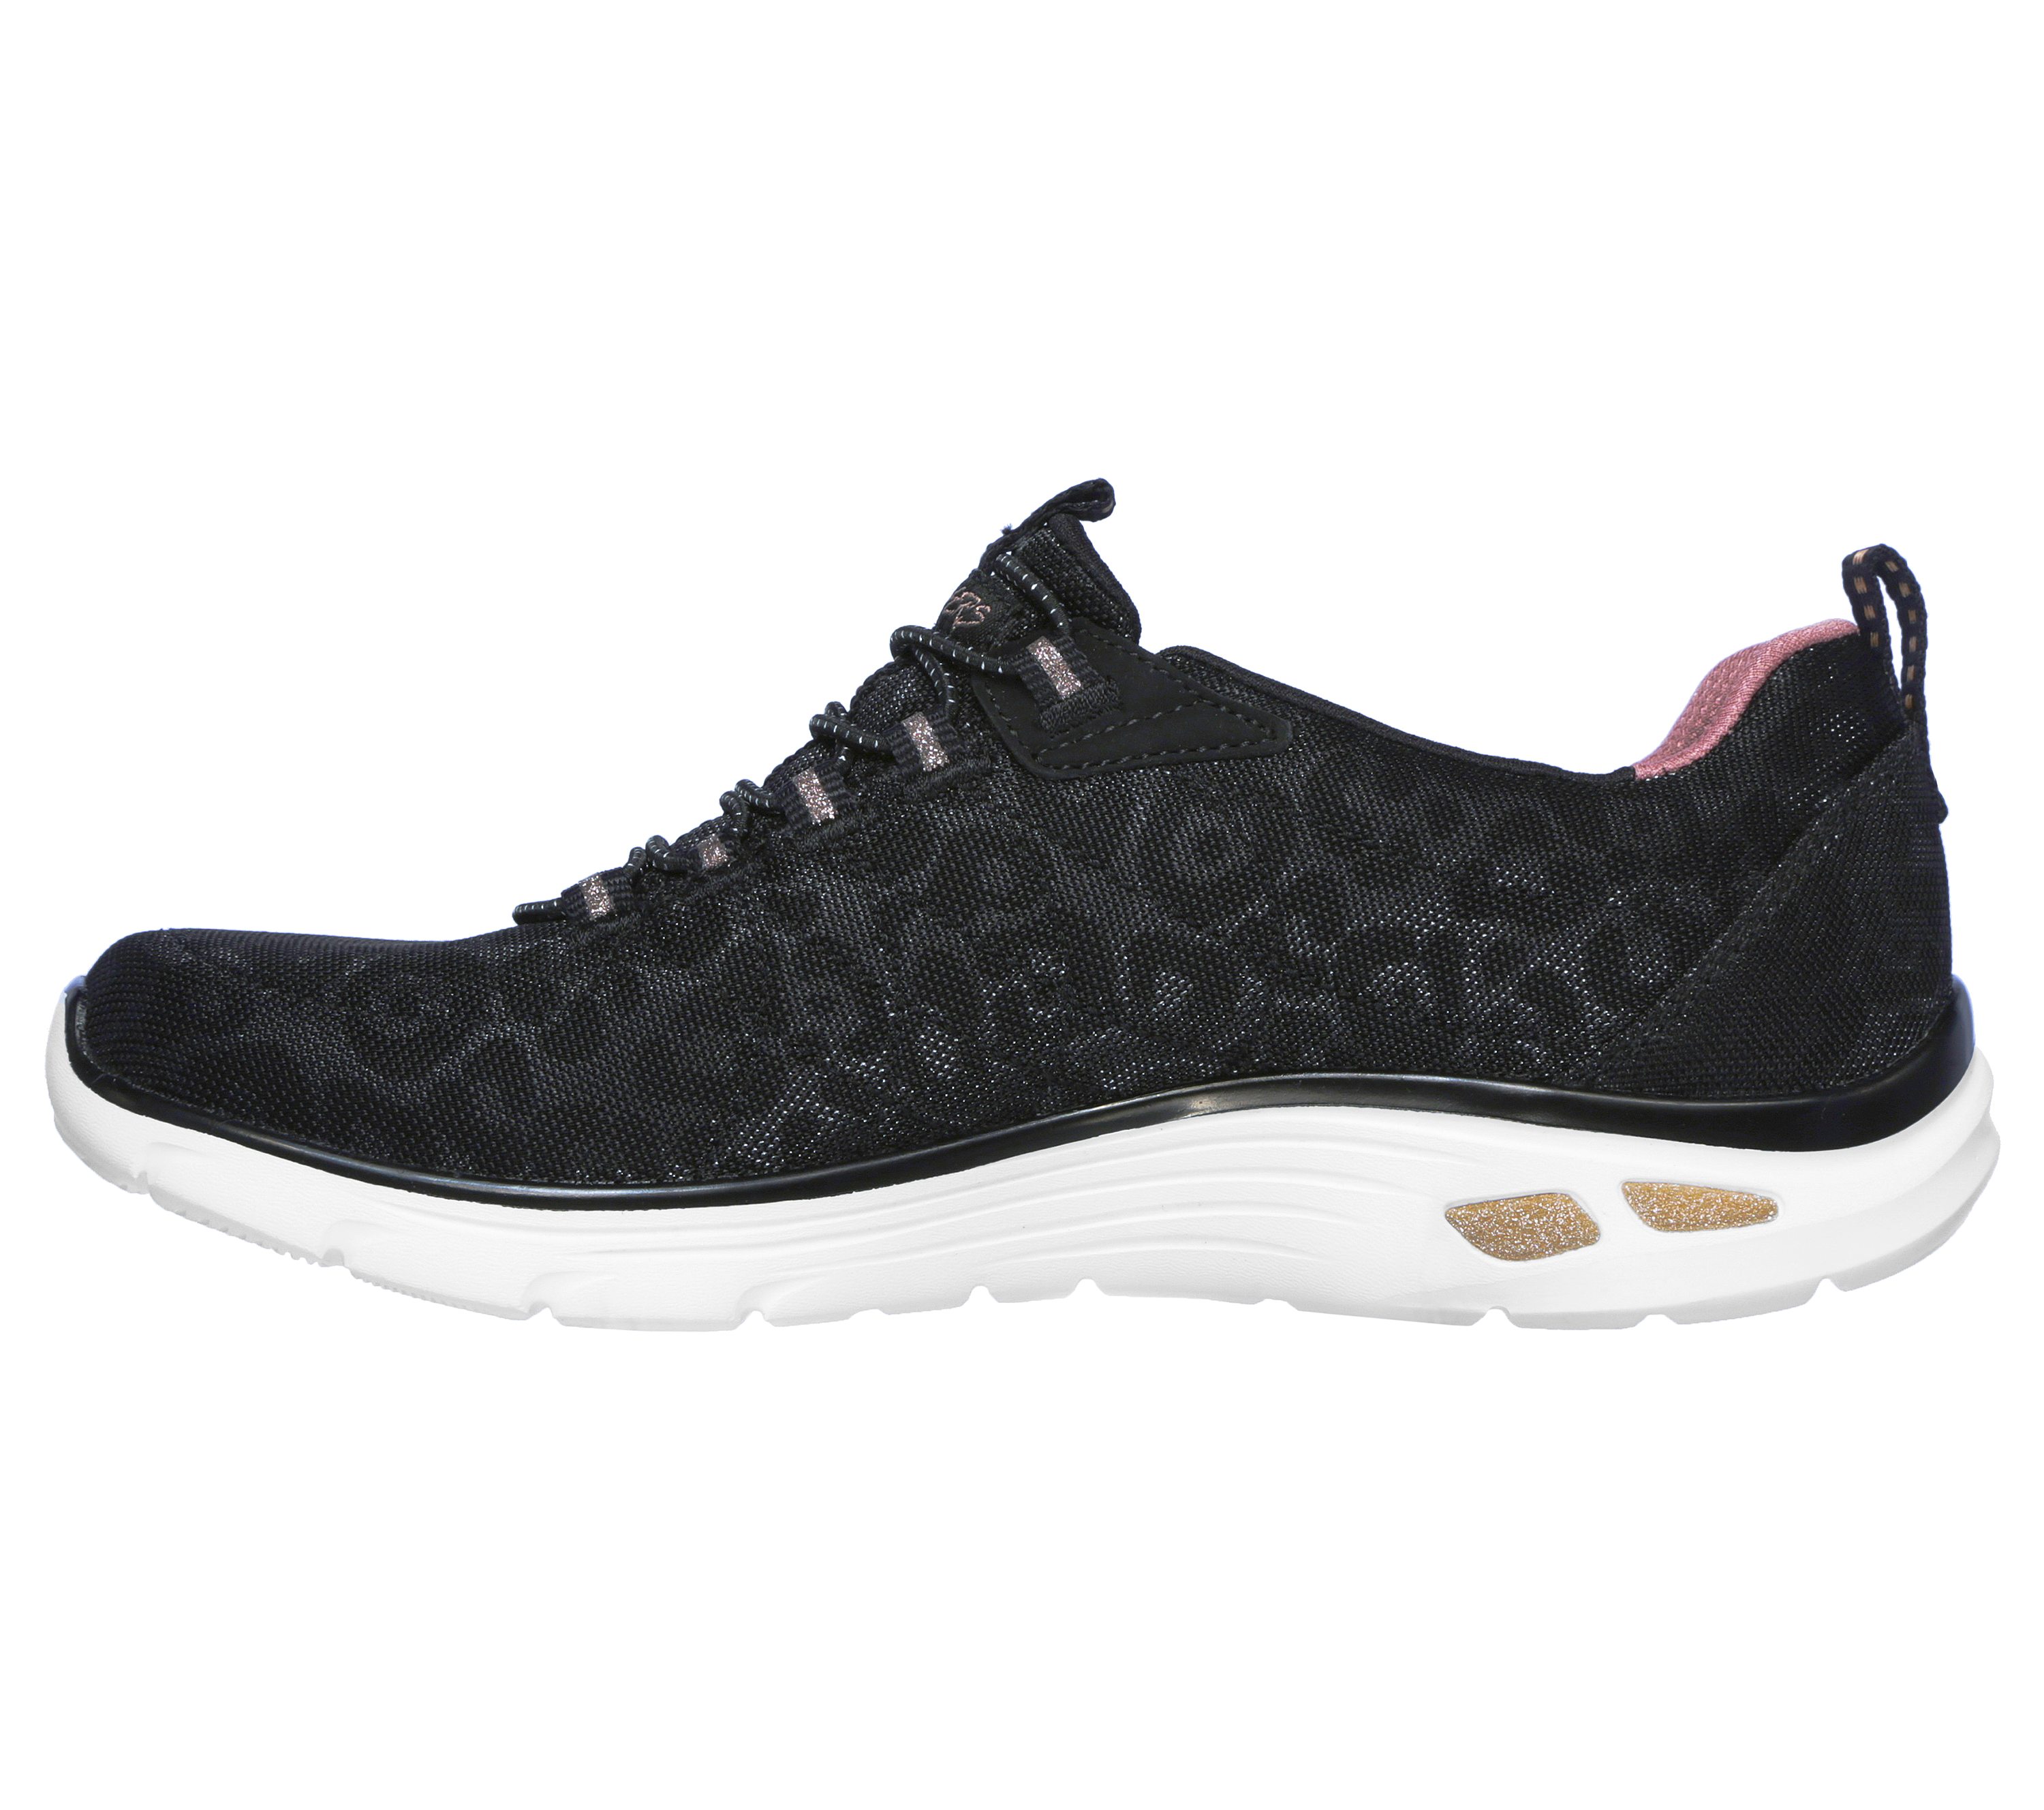 idea Abandonar heredar Relaxed Fit: Empire D'Lux - Spotted | SKECHERS ES